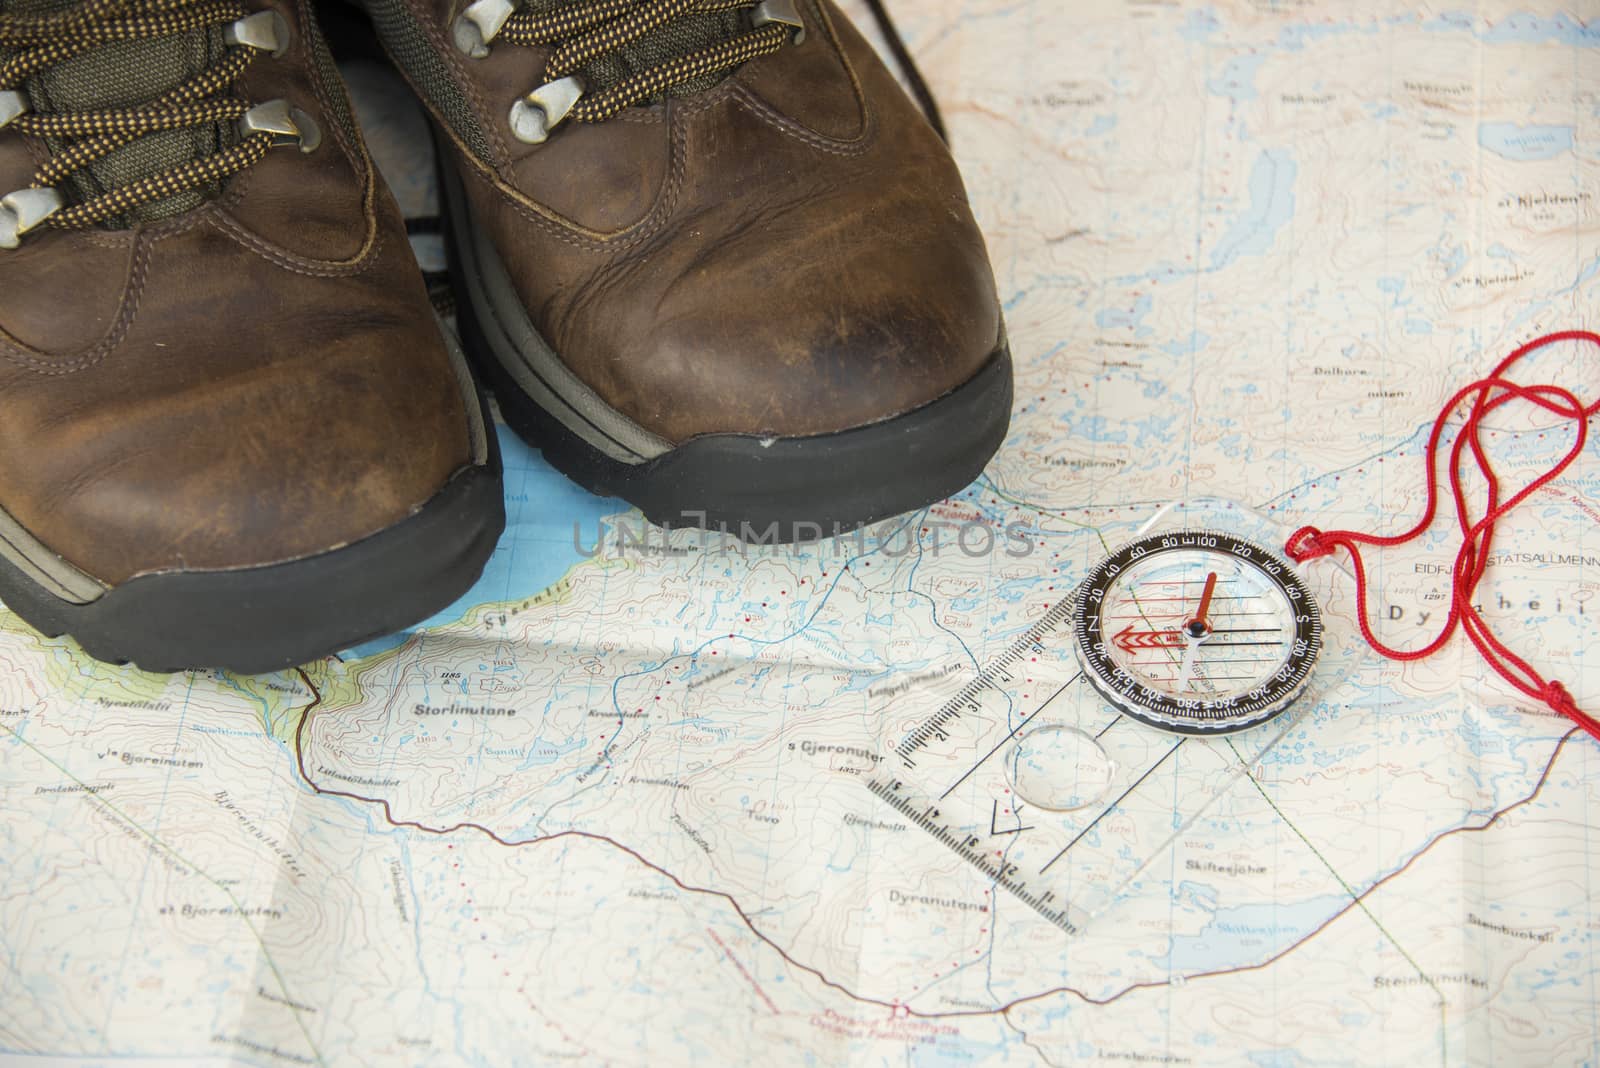 A pair of old hiking boots on a map over central Europe